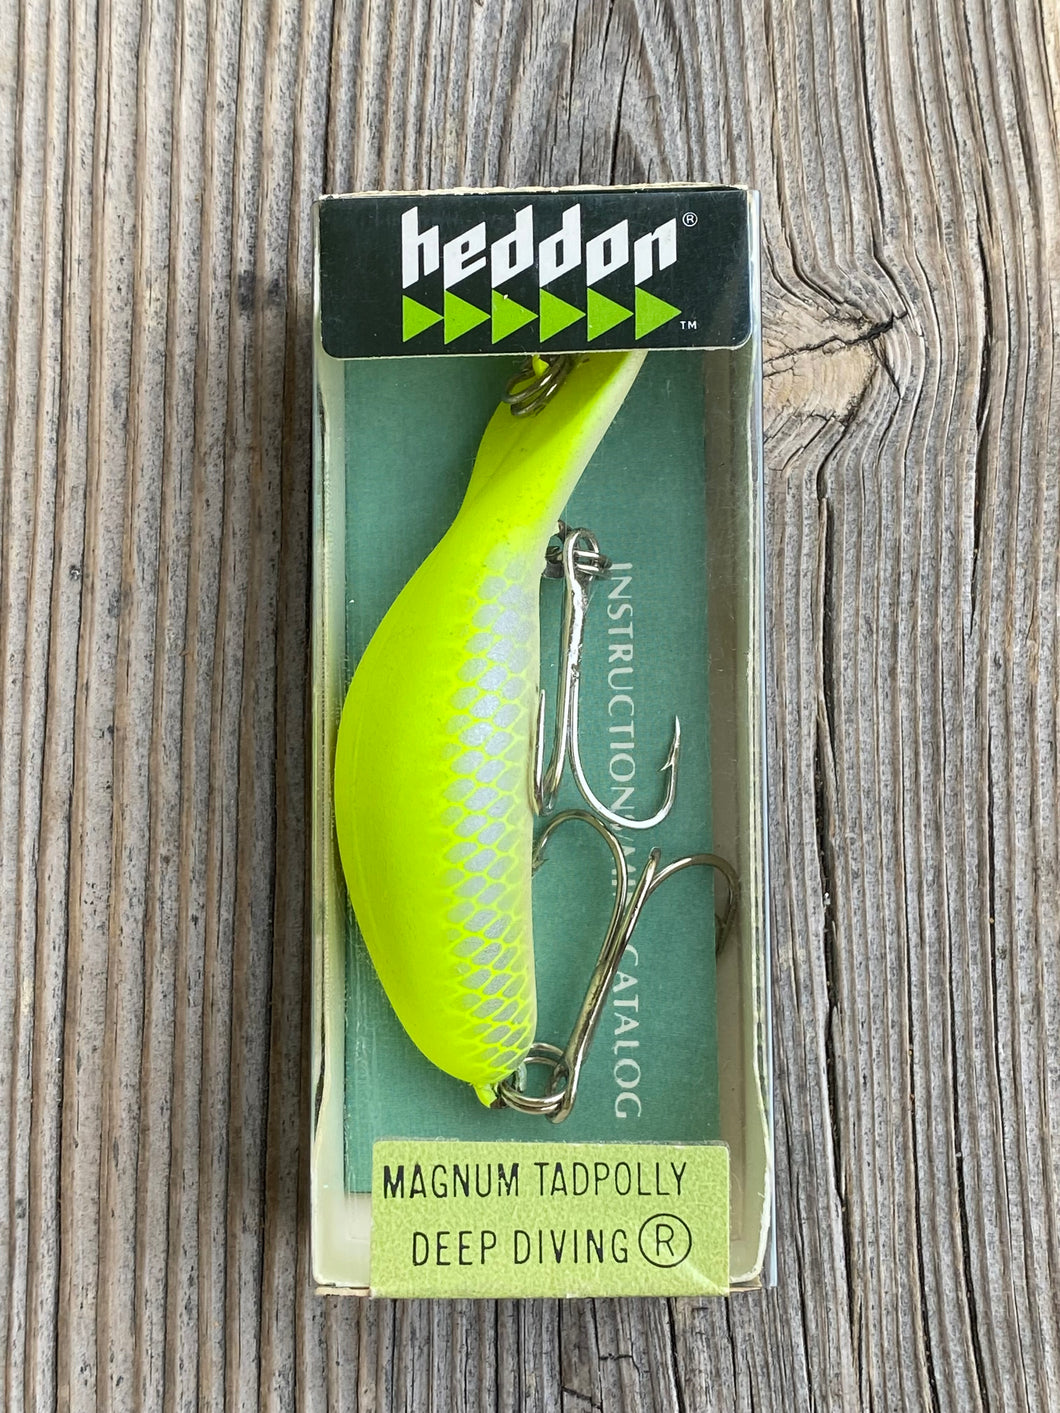 Cover Photo for HEDDON Phosphorescent MAGNUM TADPOLLY Fishing Lure